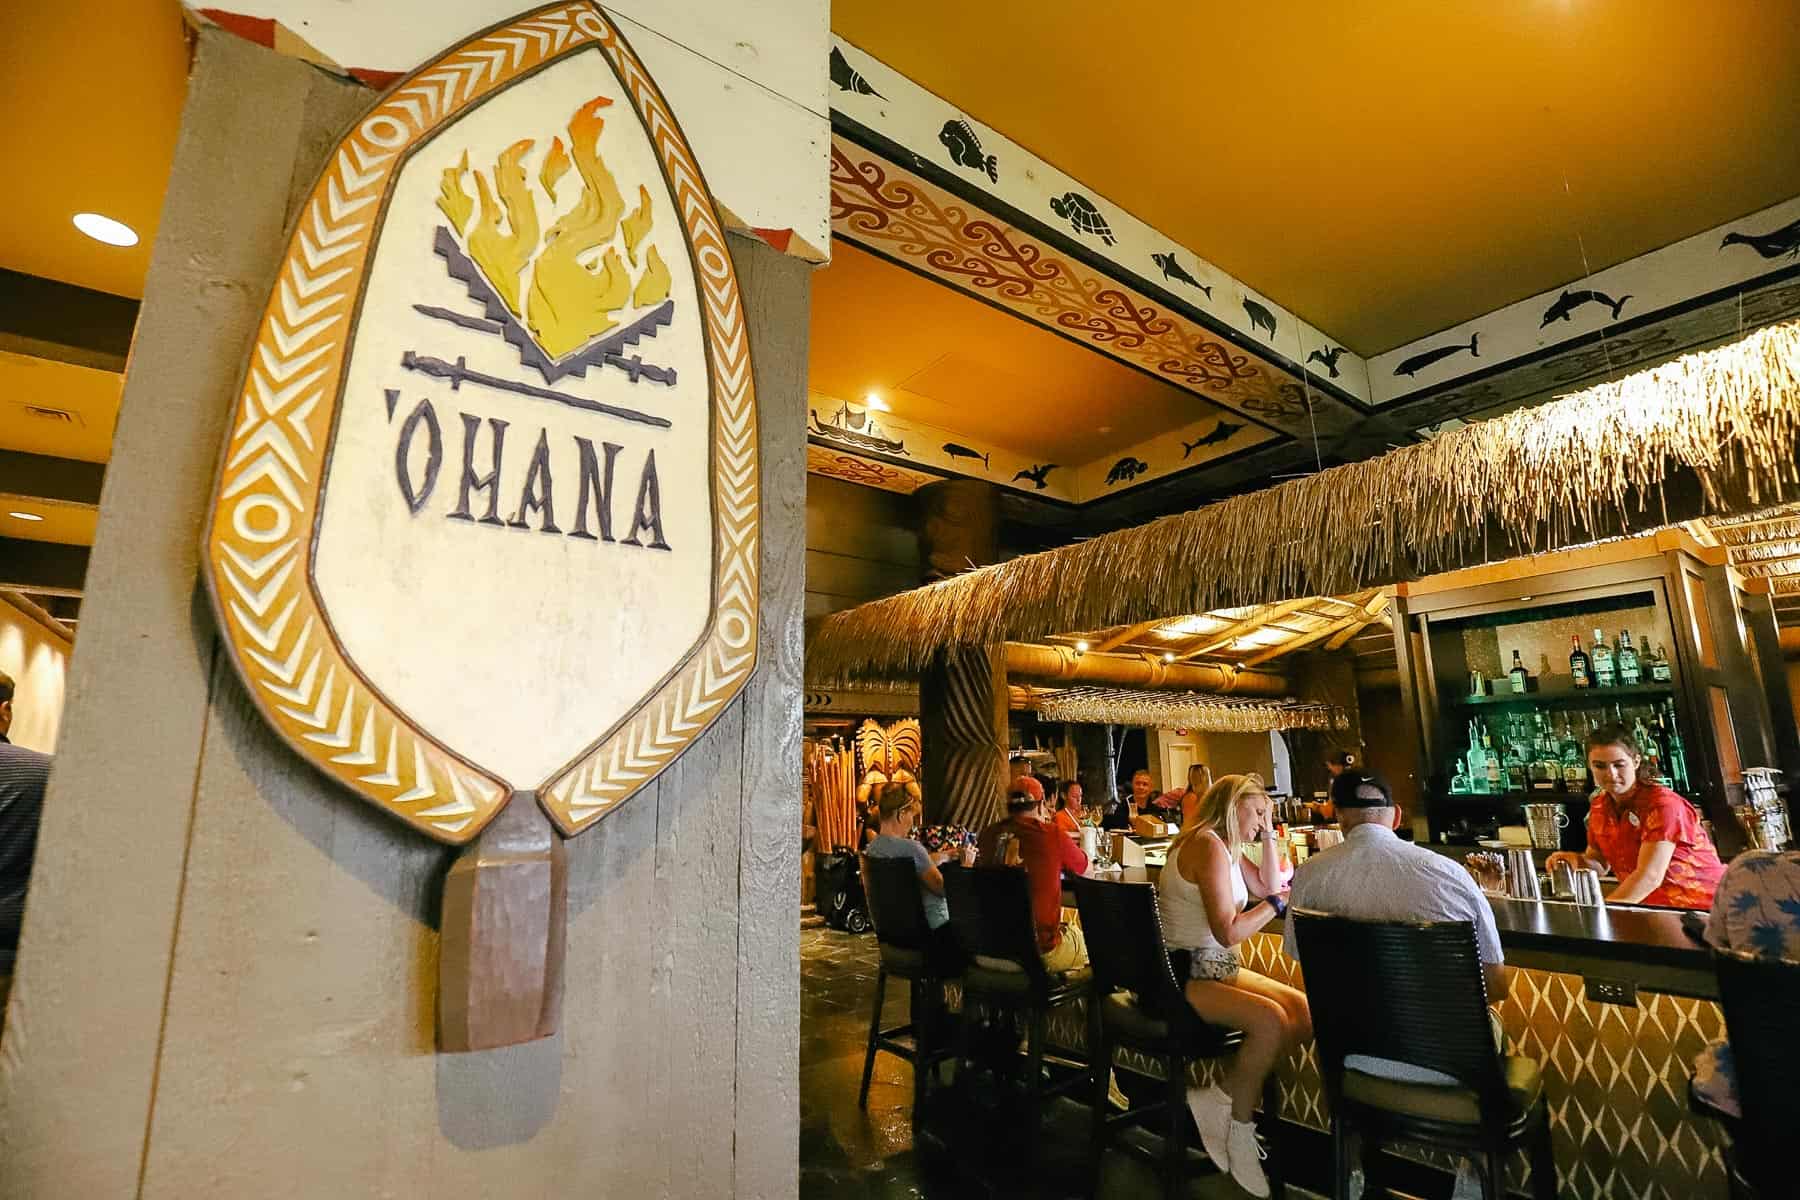 ‘Ohana Dinner Review (Does this Fan Favorite Meal Meet Expectations?)